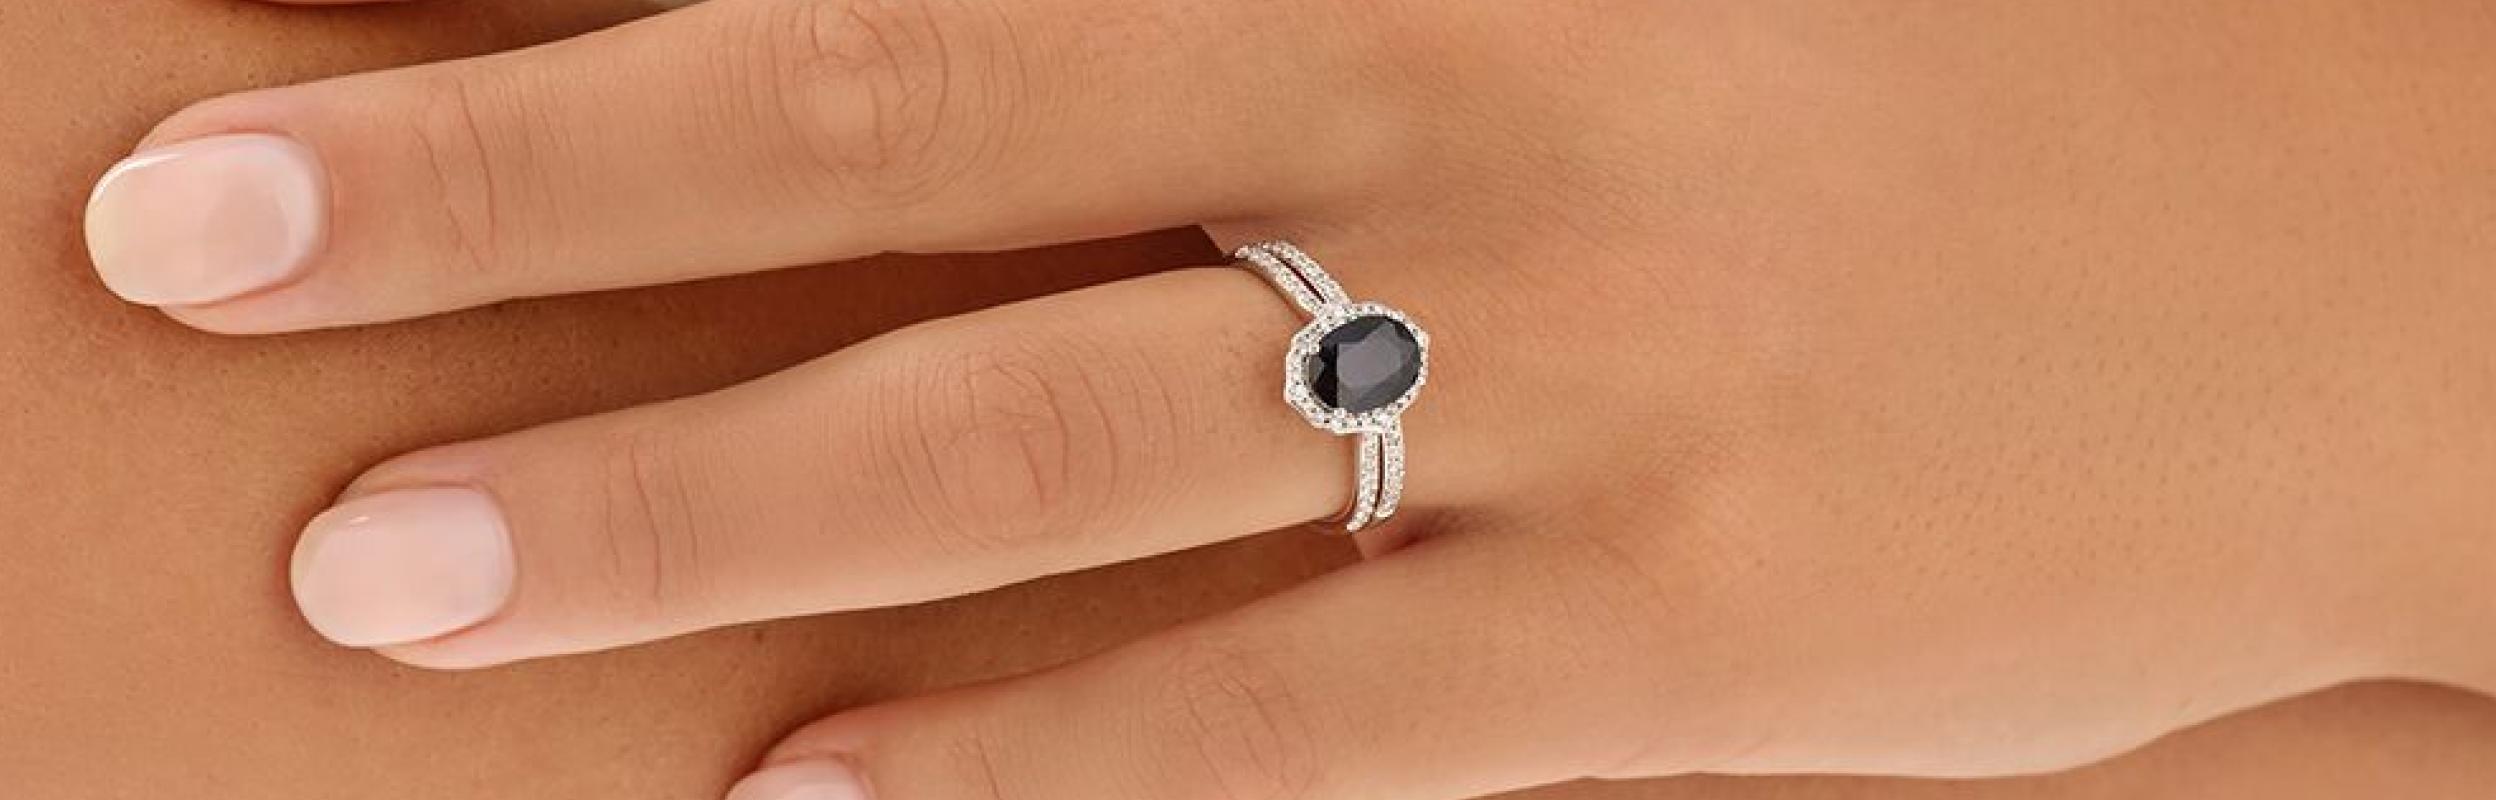 blue sapphire engagement ring with diamond halo